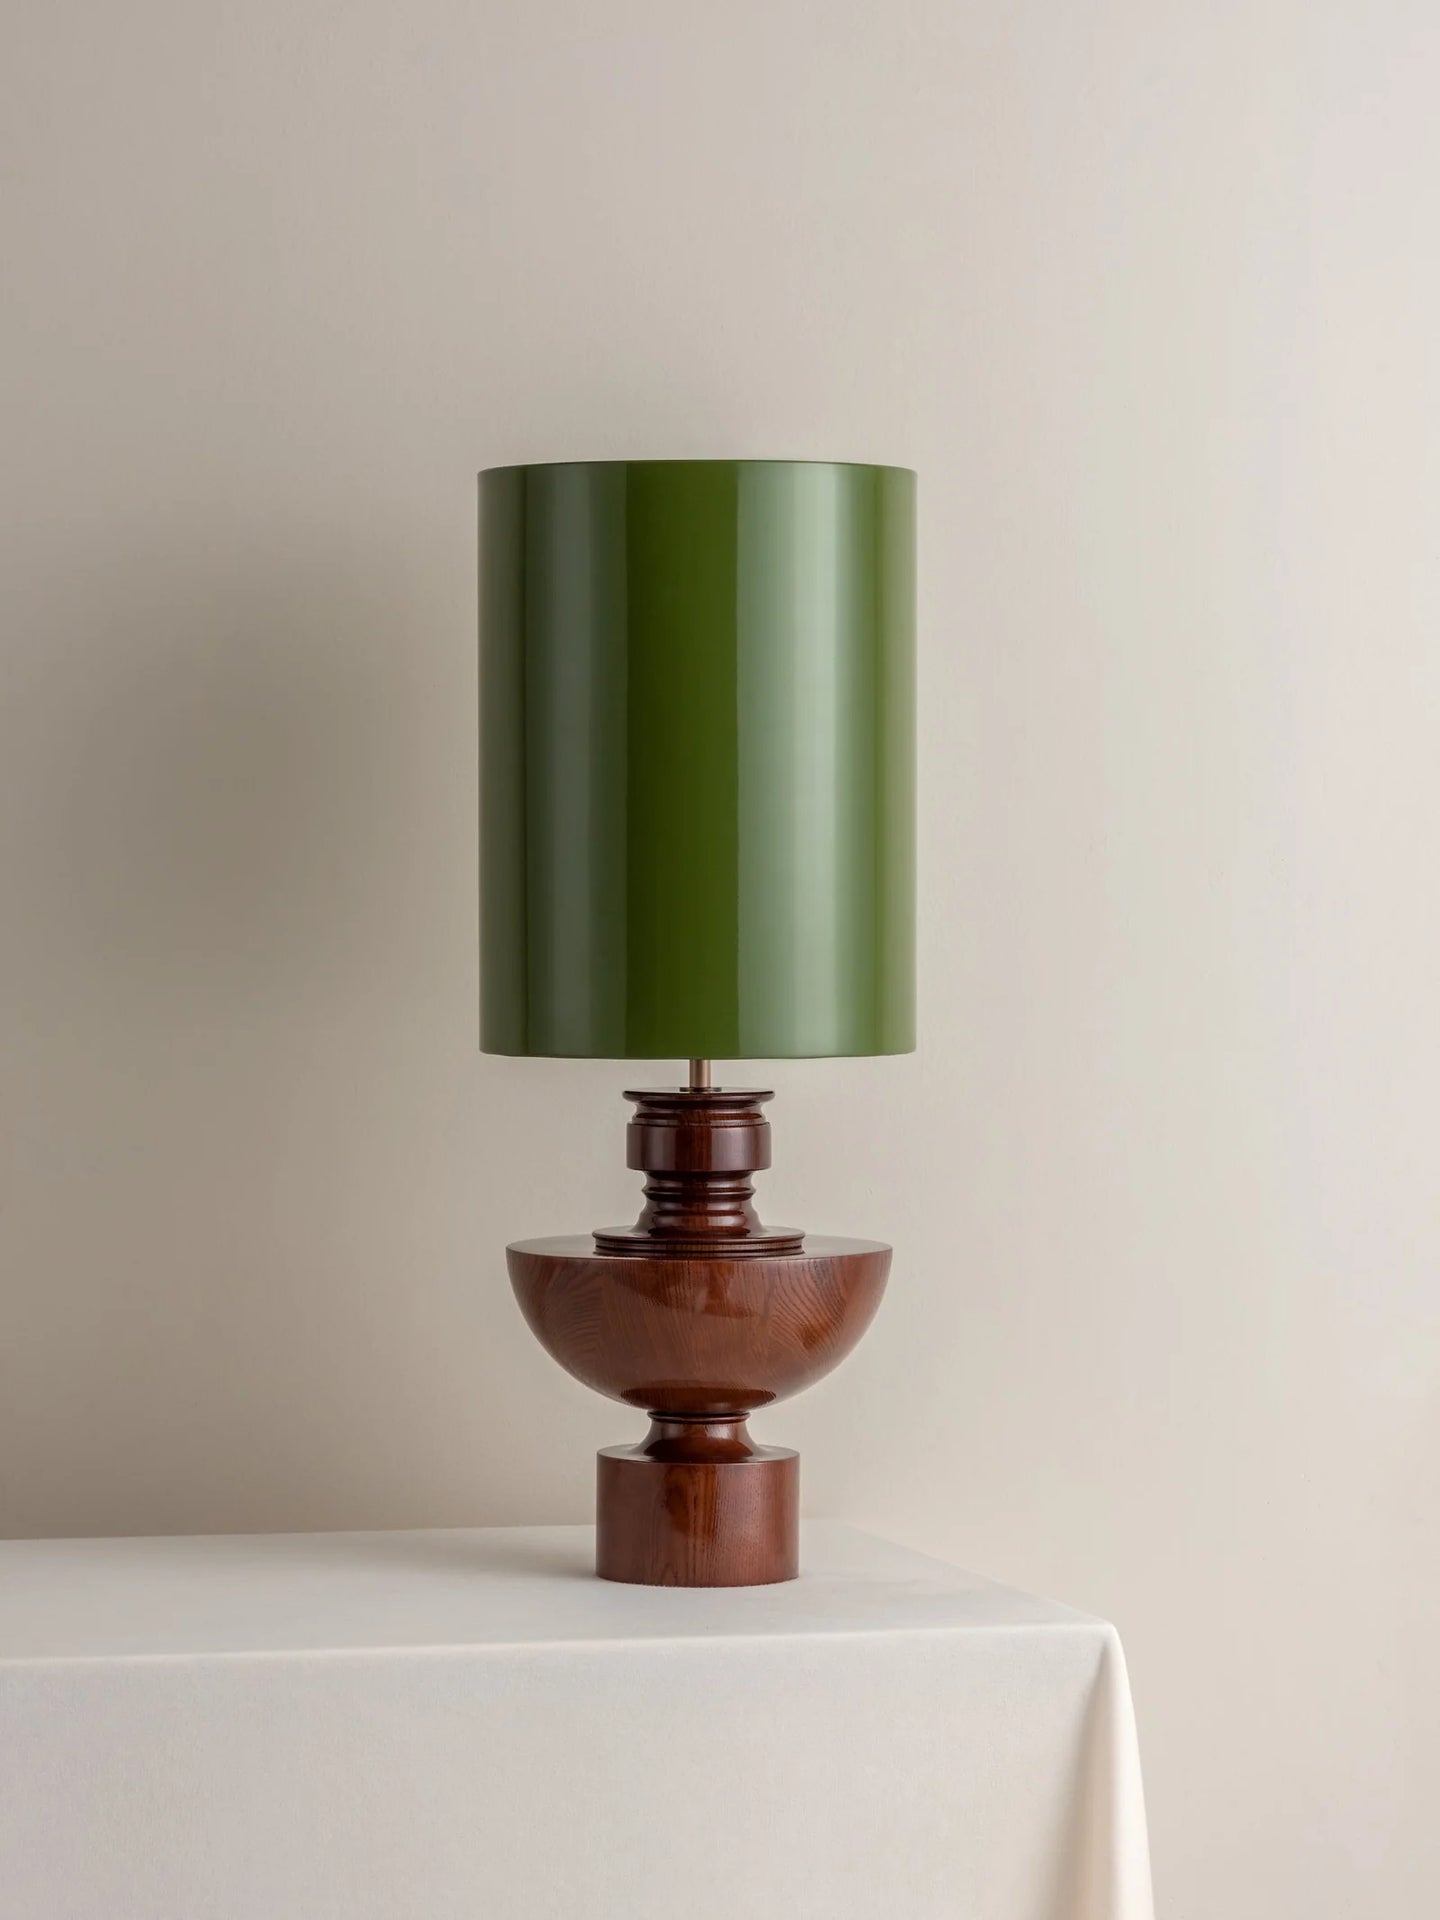 Spun Wood Table Lamp with Green Shade